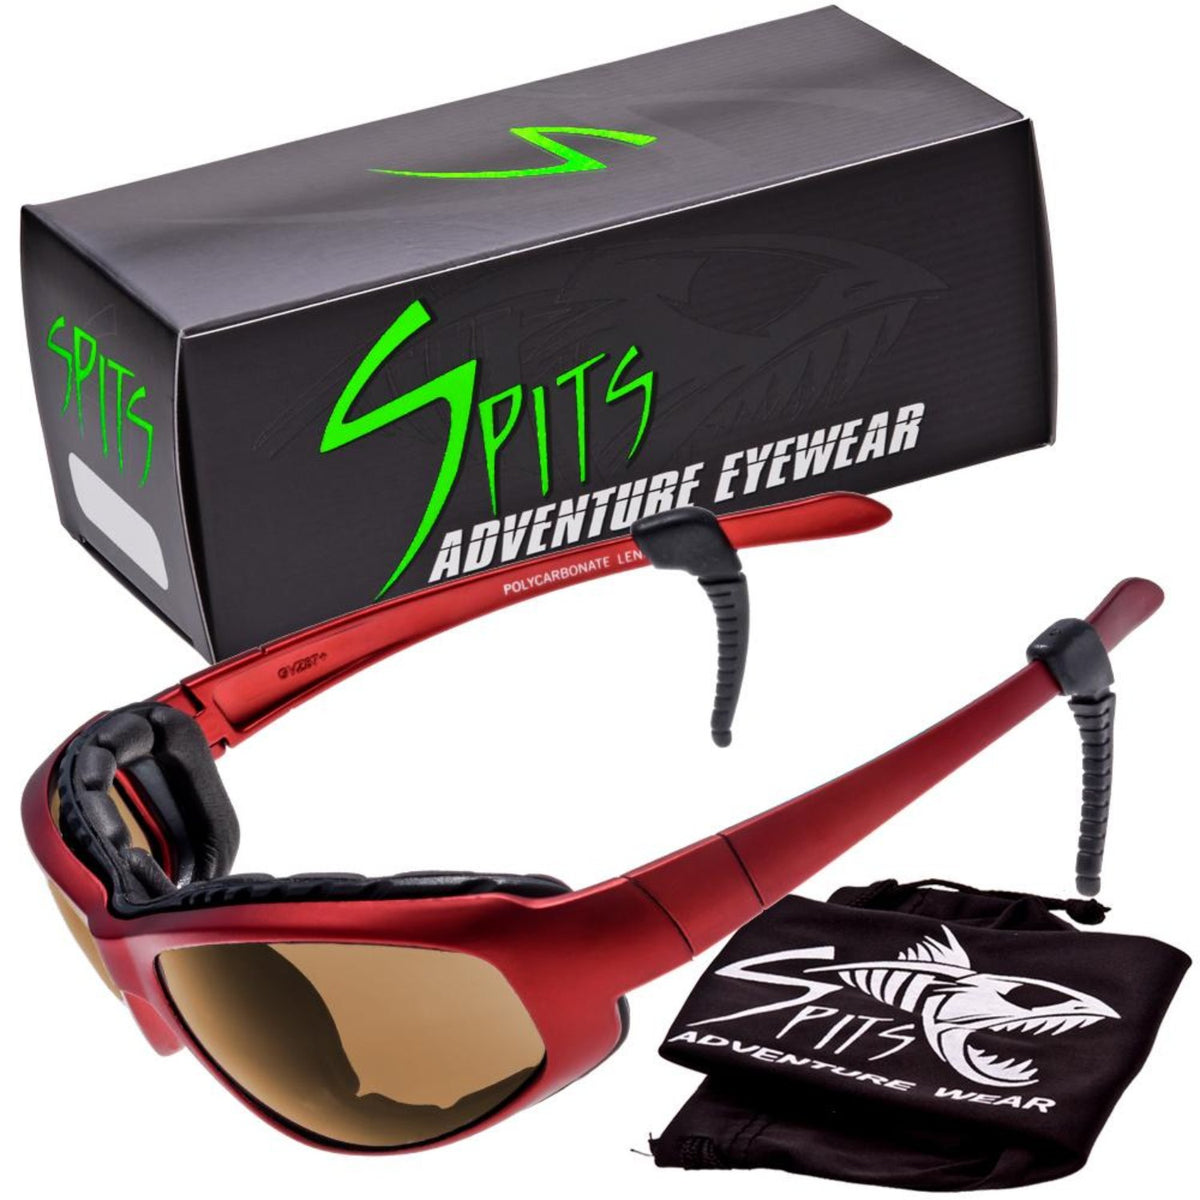 Sniper Red -  Safety Rated Sunglasses Various Lens Colors, Photochromic and Foam Padding Options